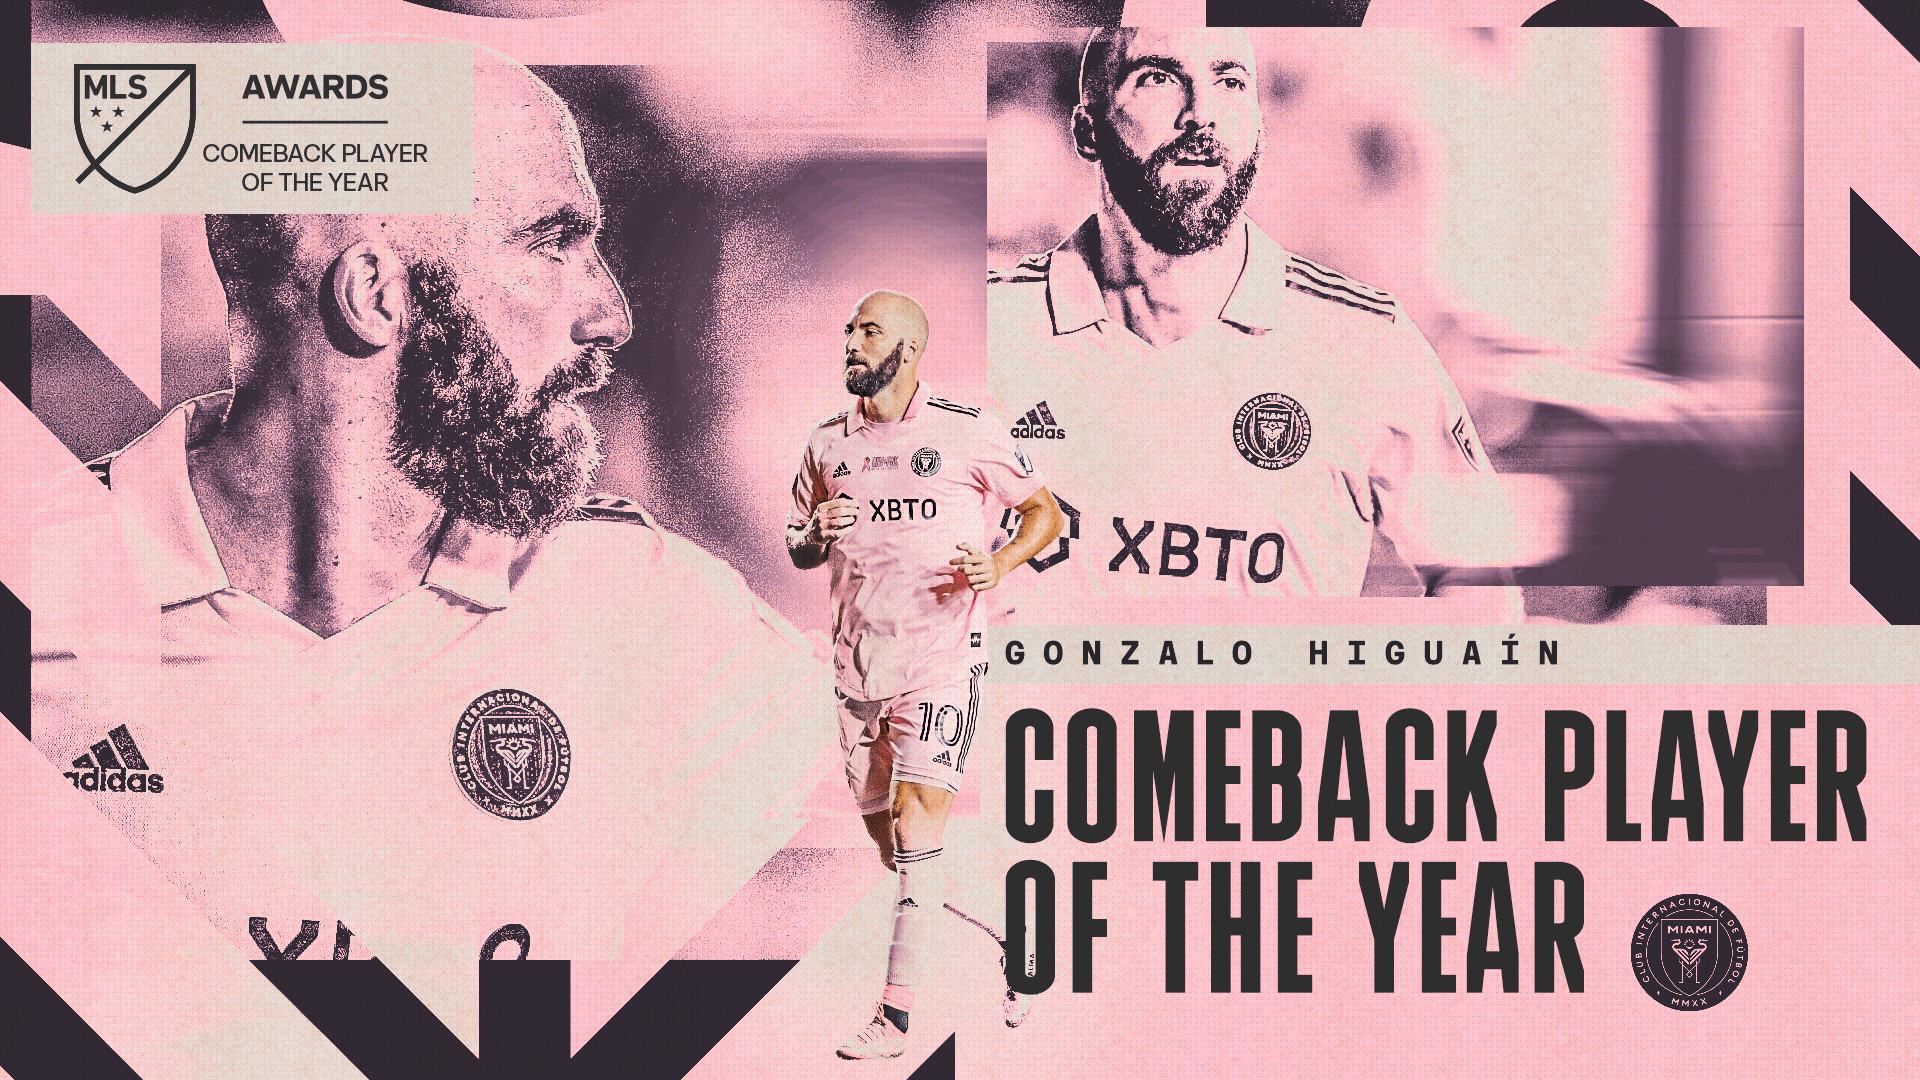 Inter Miami's Gonzalo Higuaín named 2022 MLS Comeback Player of the